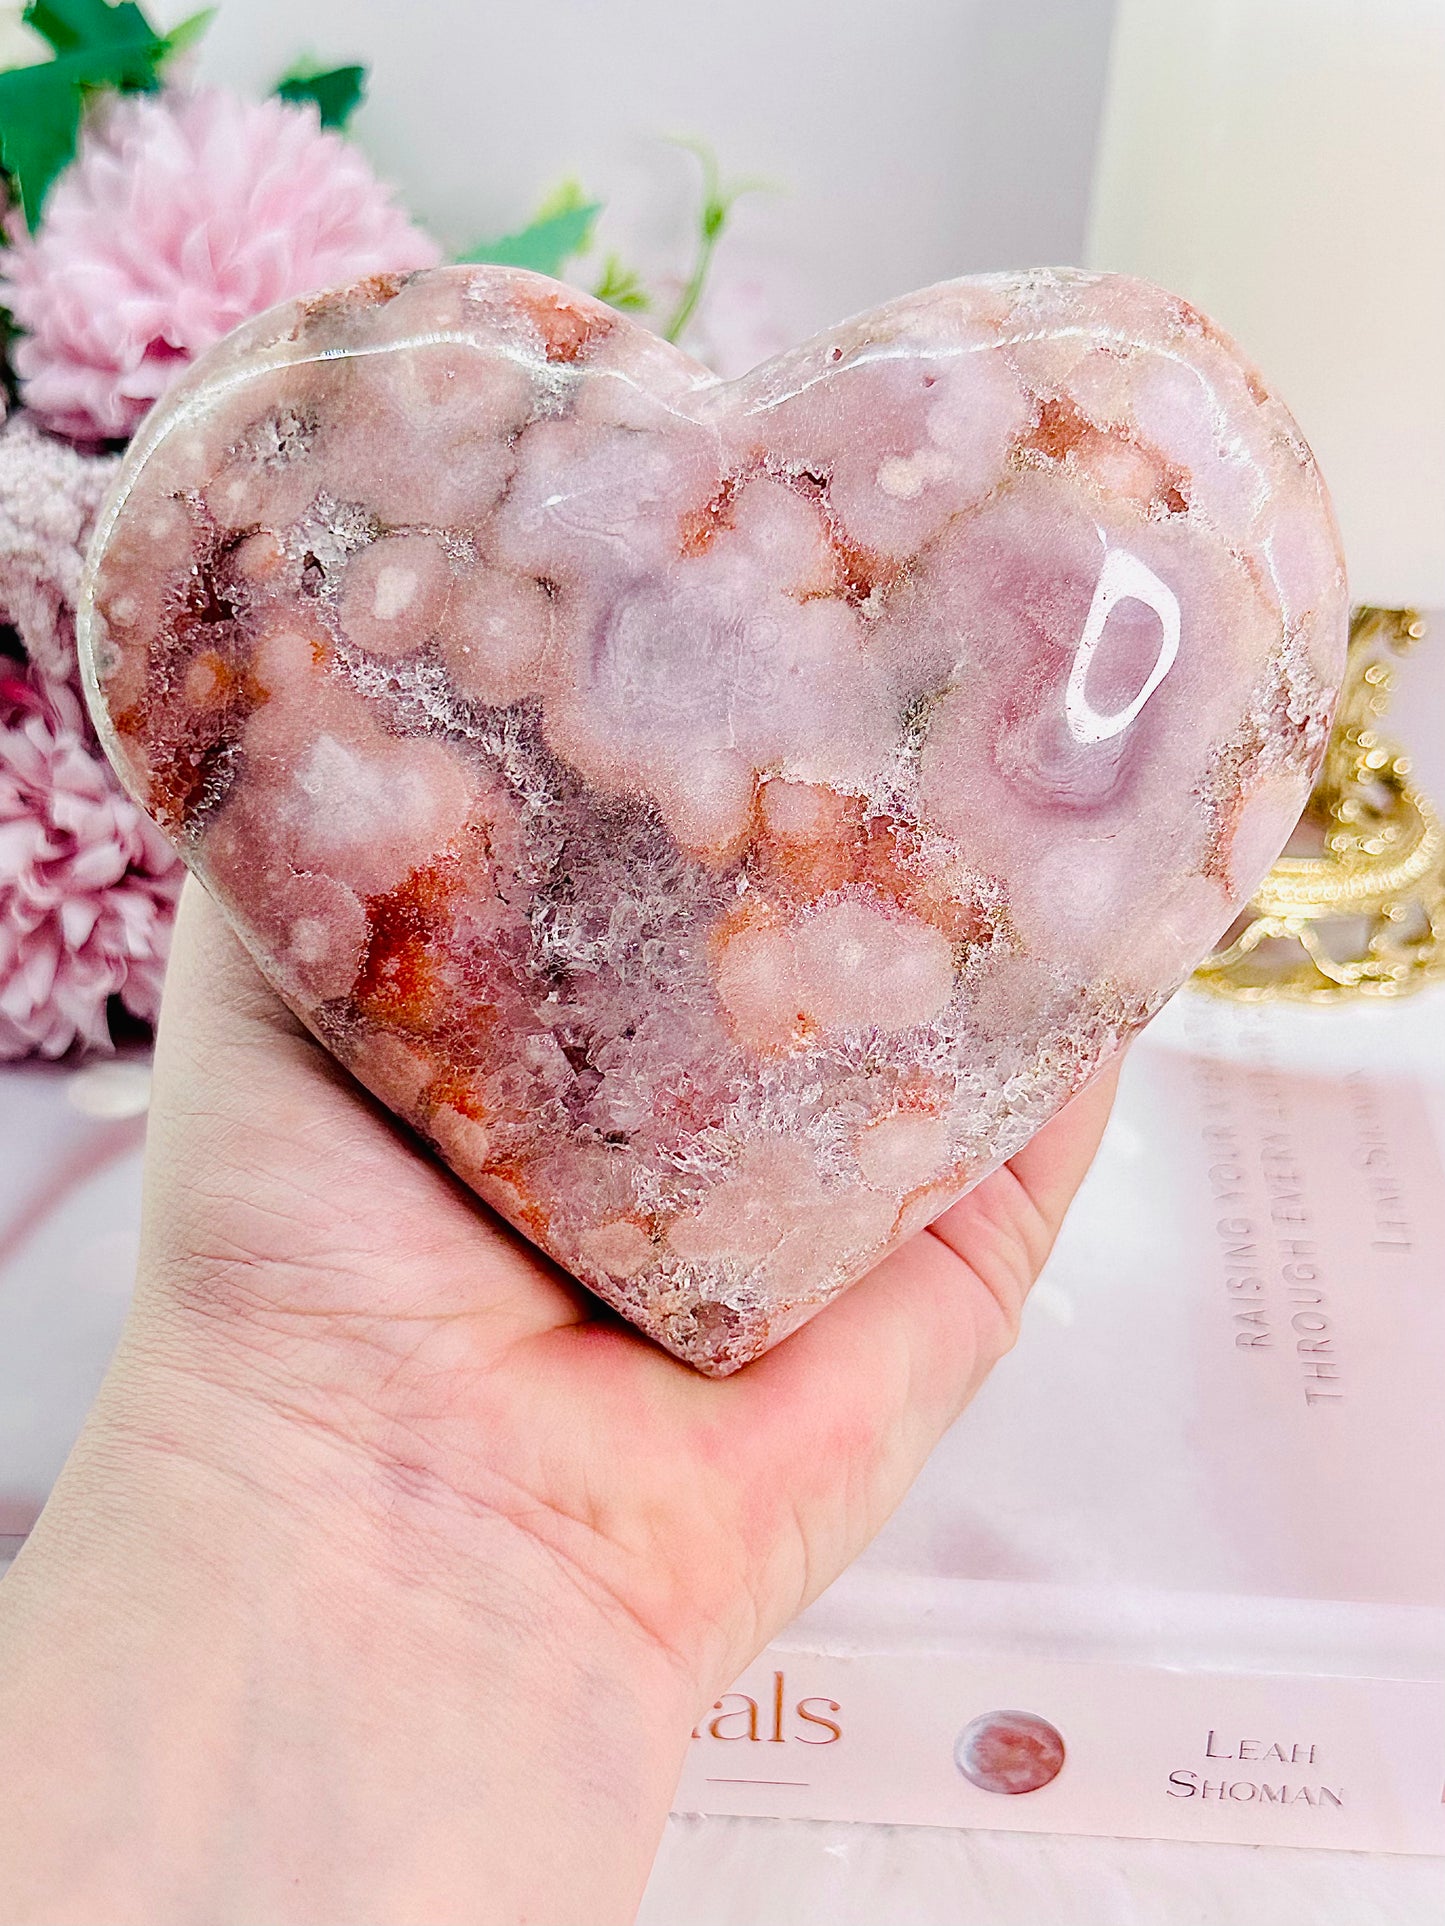 FABULOUS High Grade Pink Amethyst Carved Chunky Heart From Brazil with Incredible Crystallisation 558grams